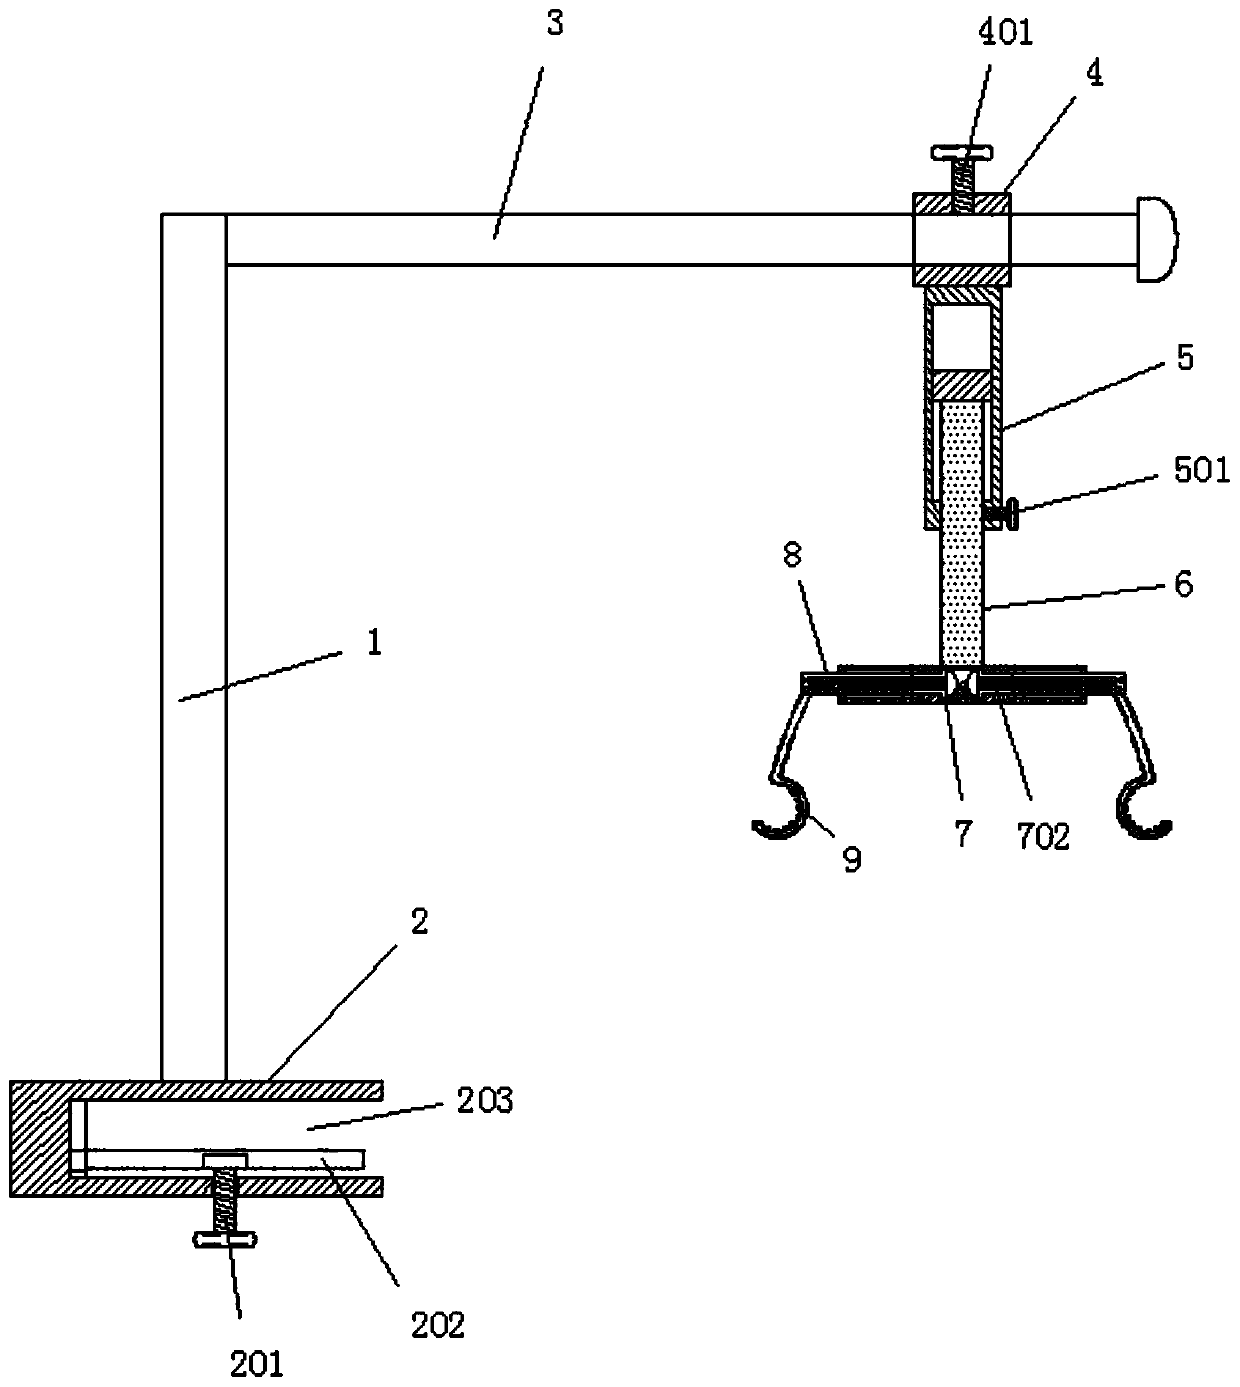 Sliding located draw hook for surgical operations of livers and gallbladders